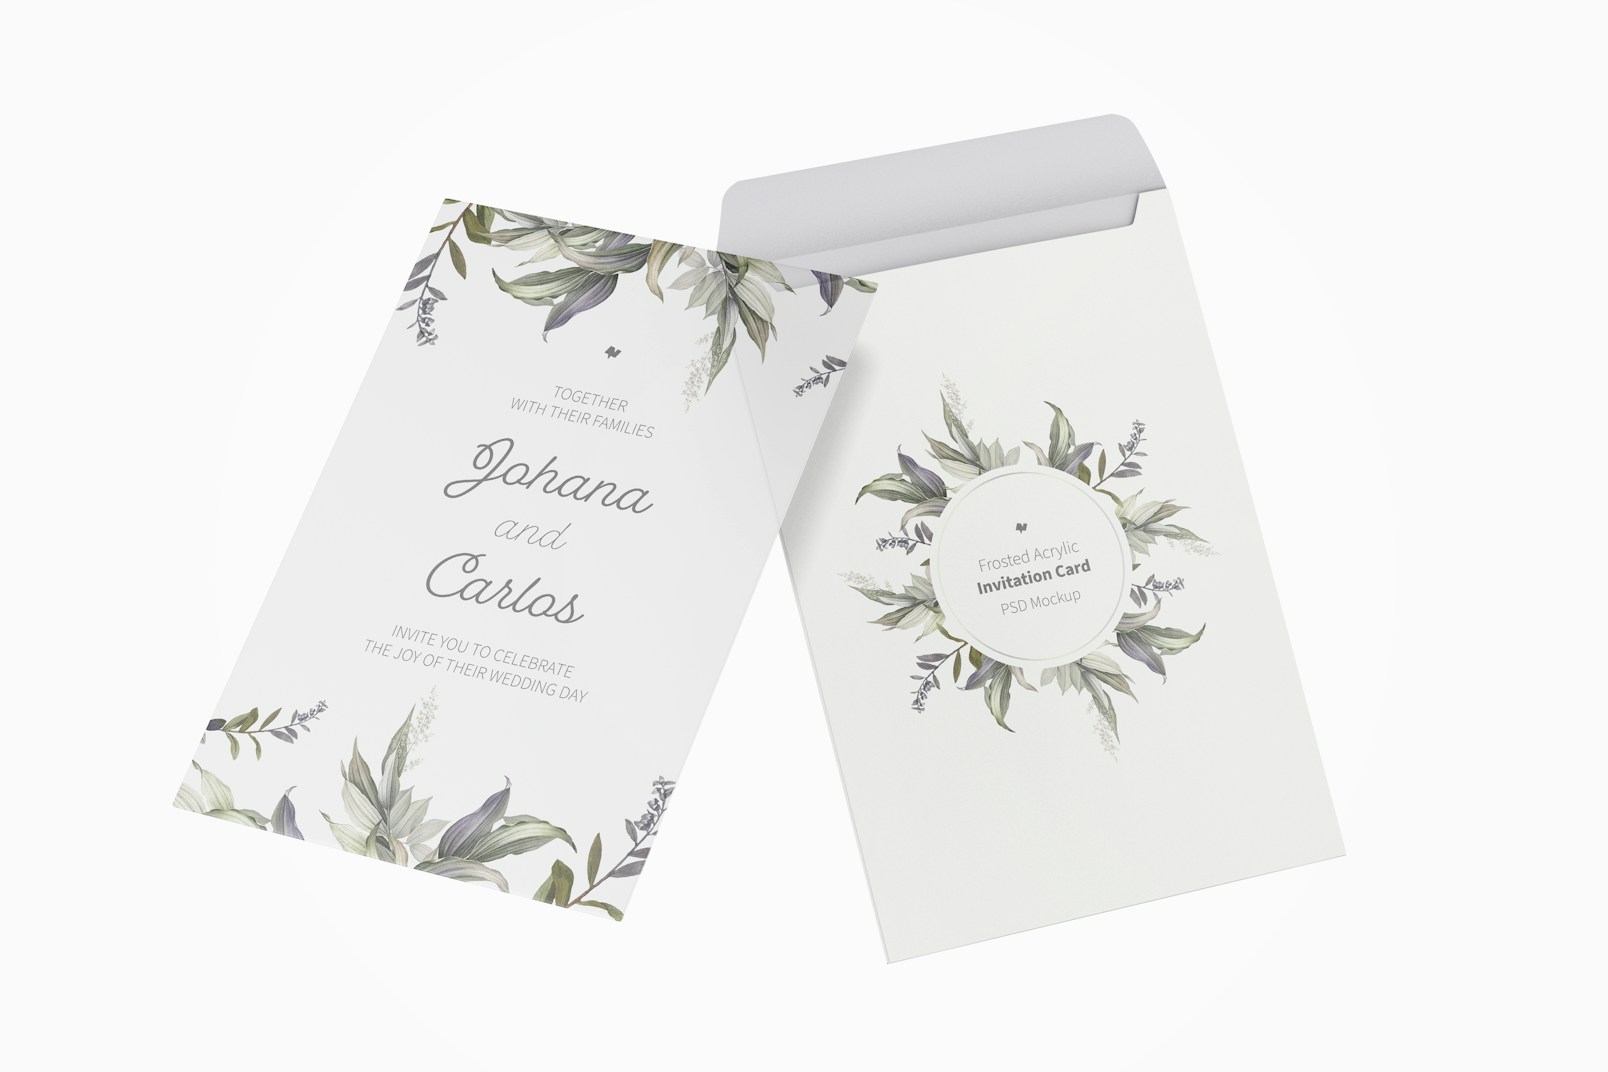 Frosted Acrylic Invitation Card with Envelope Mockup, Floating